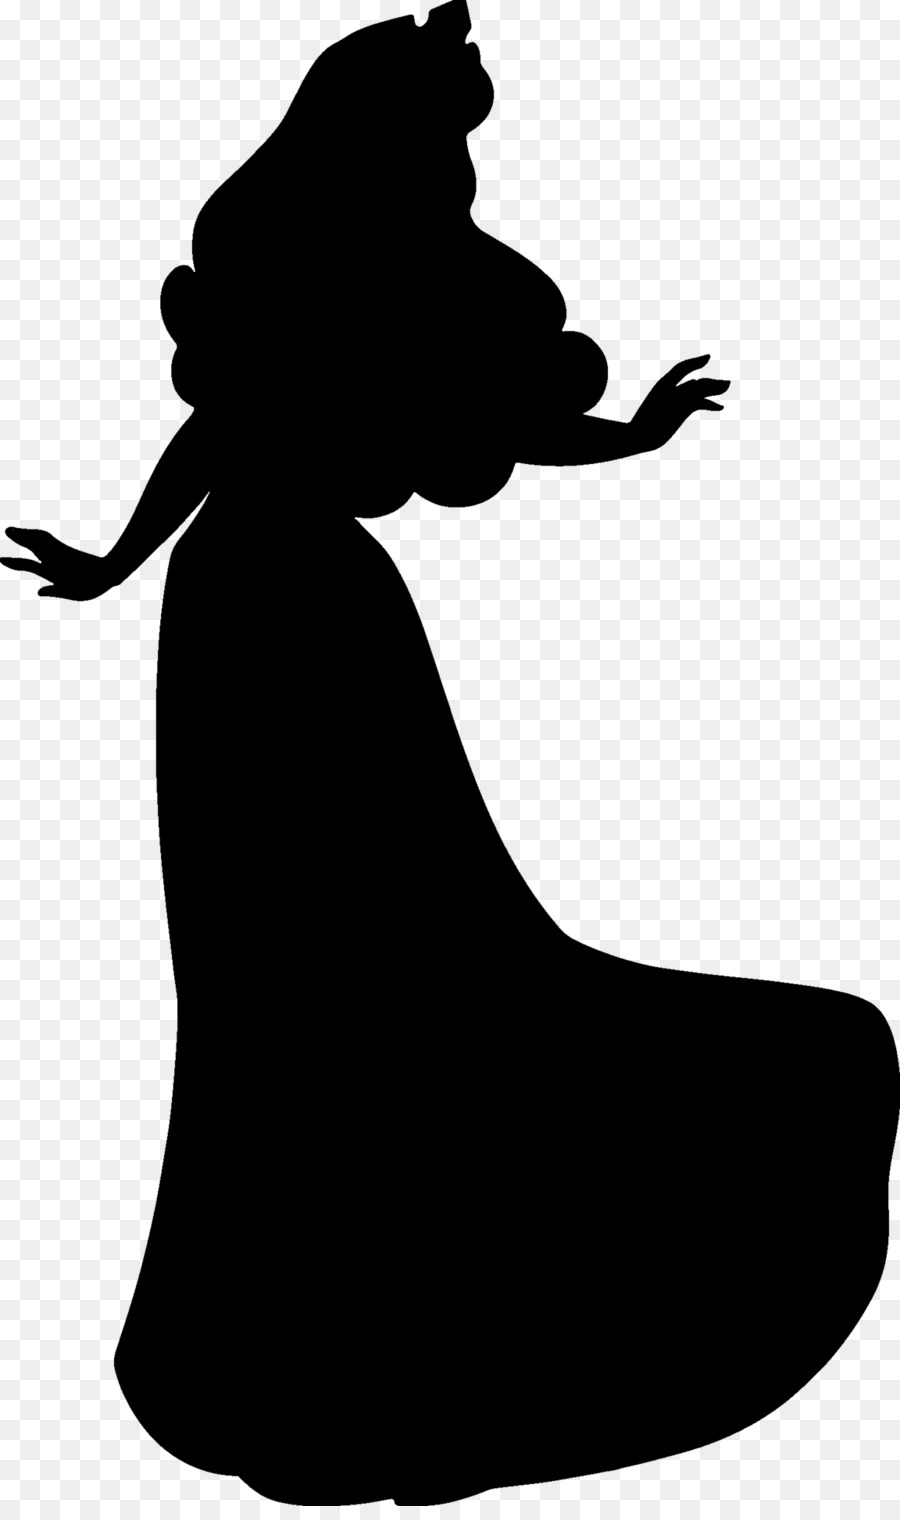 Free Princess Silhouette Clipart, Download Free Clip Art.